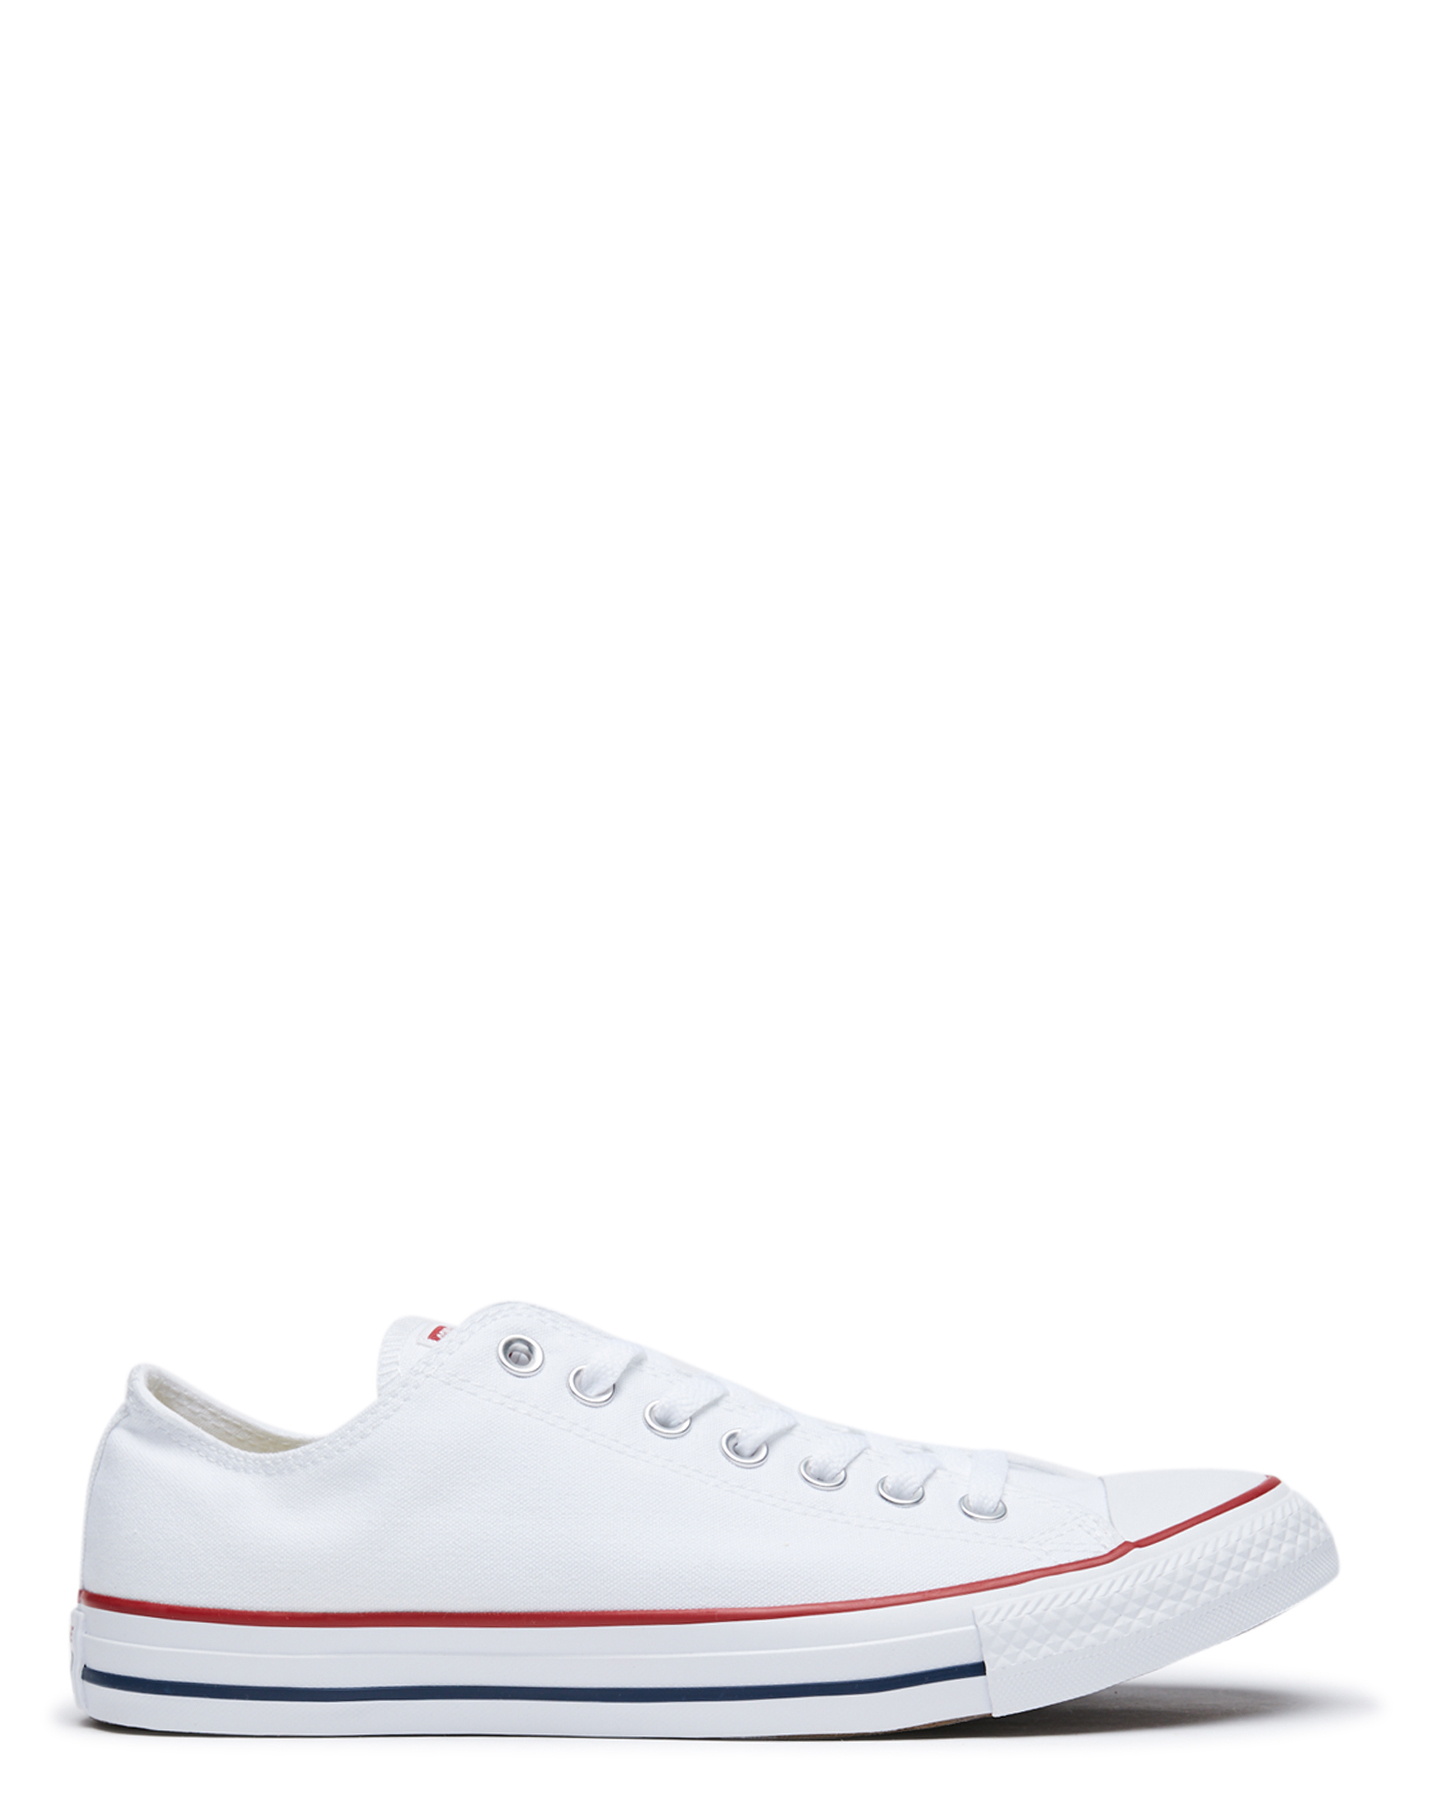 converse sneakers for ladies - 64 